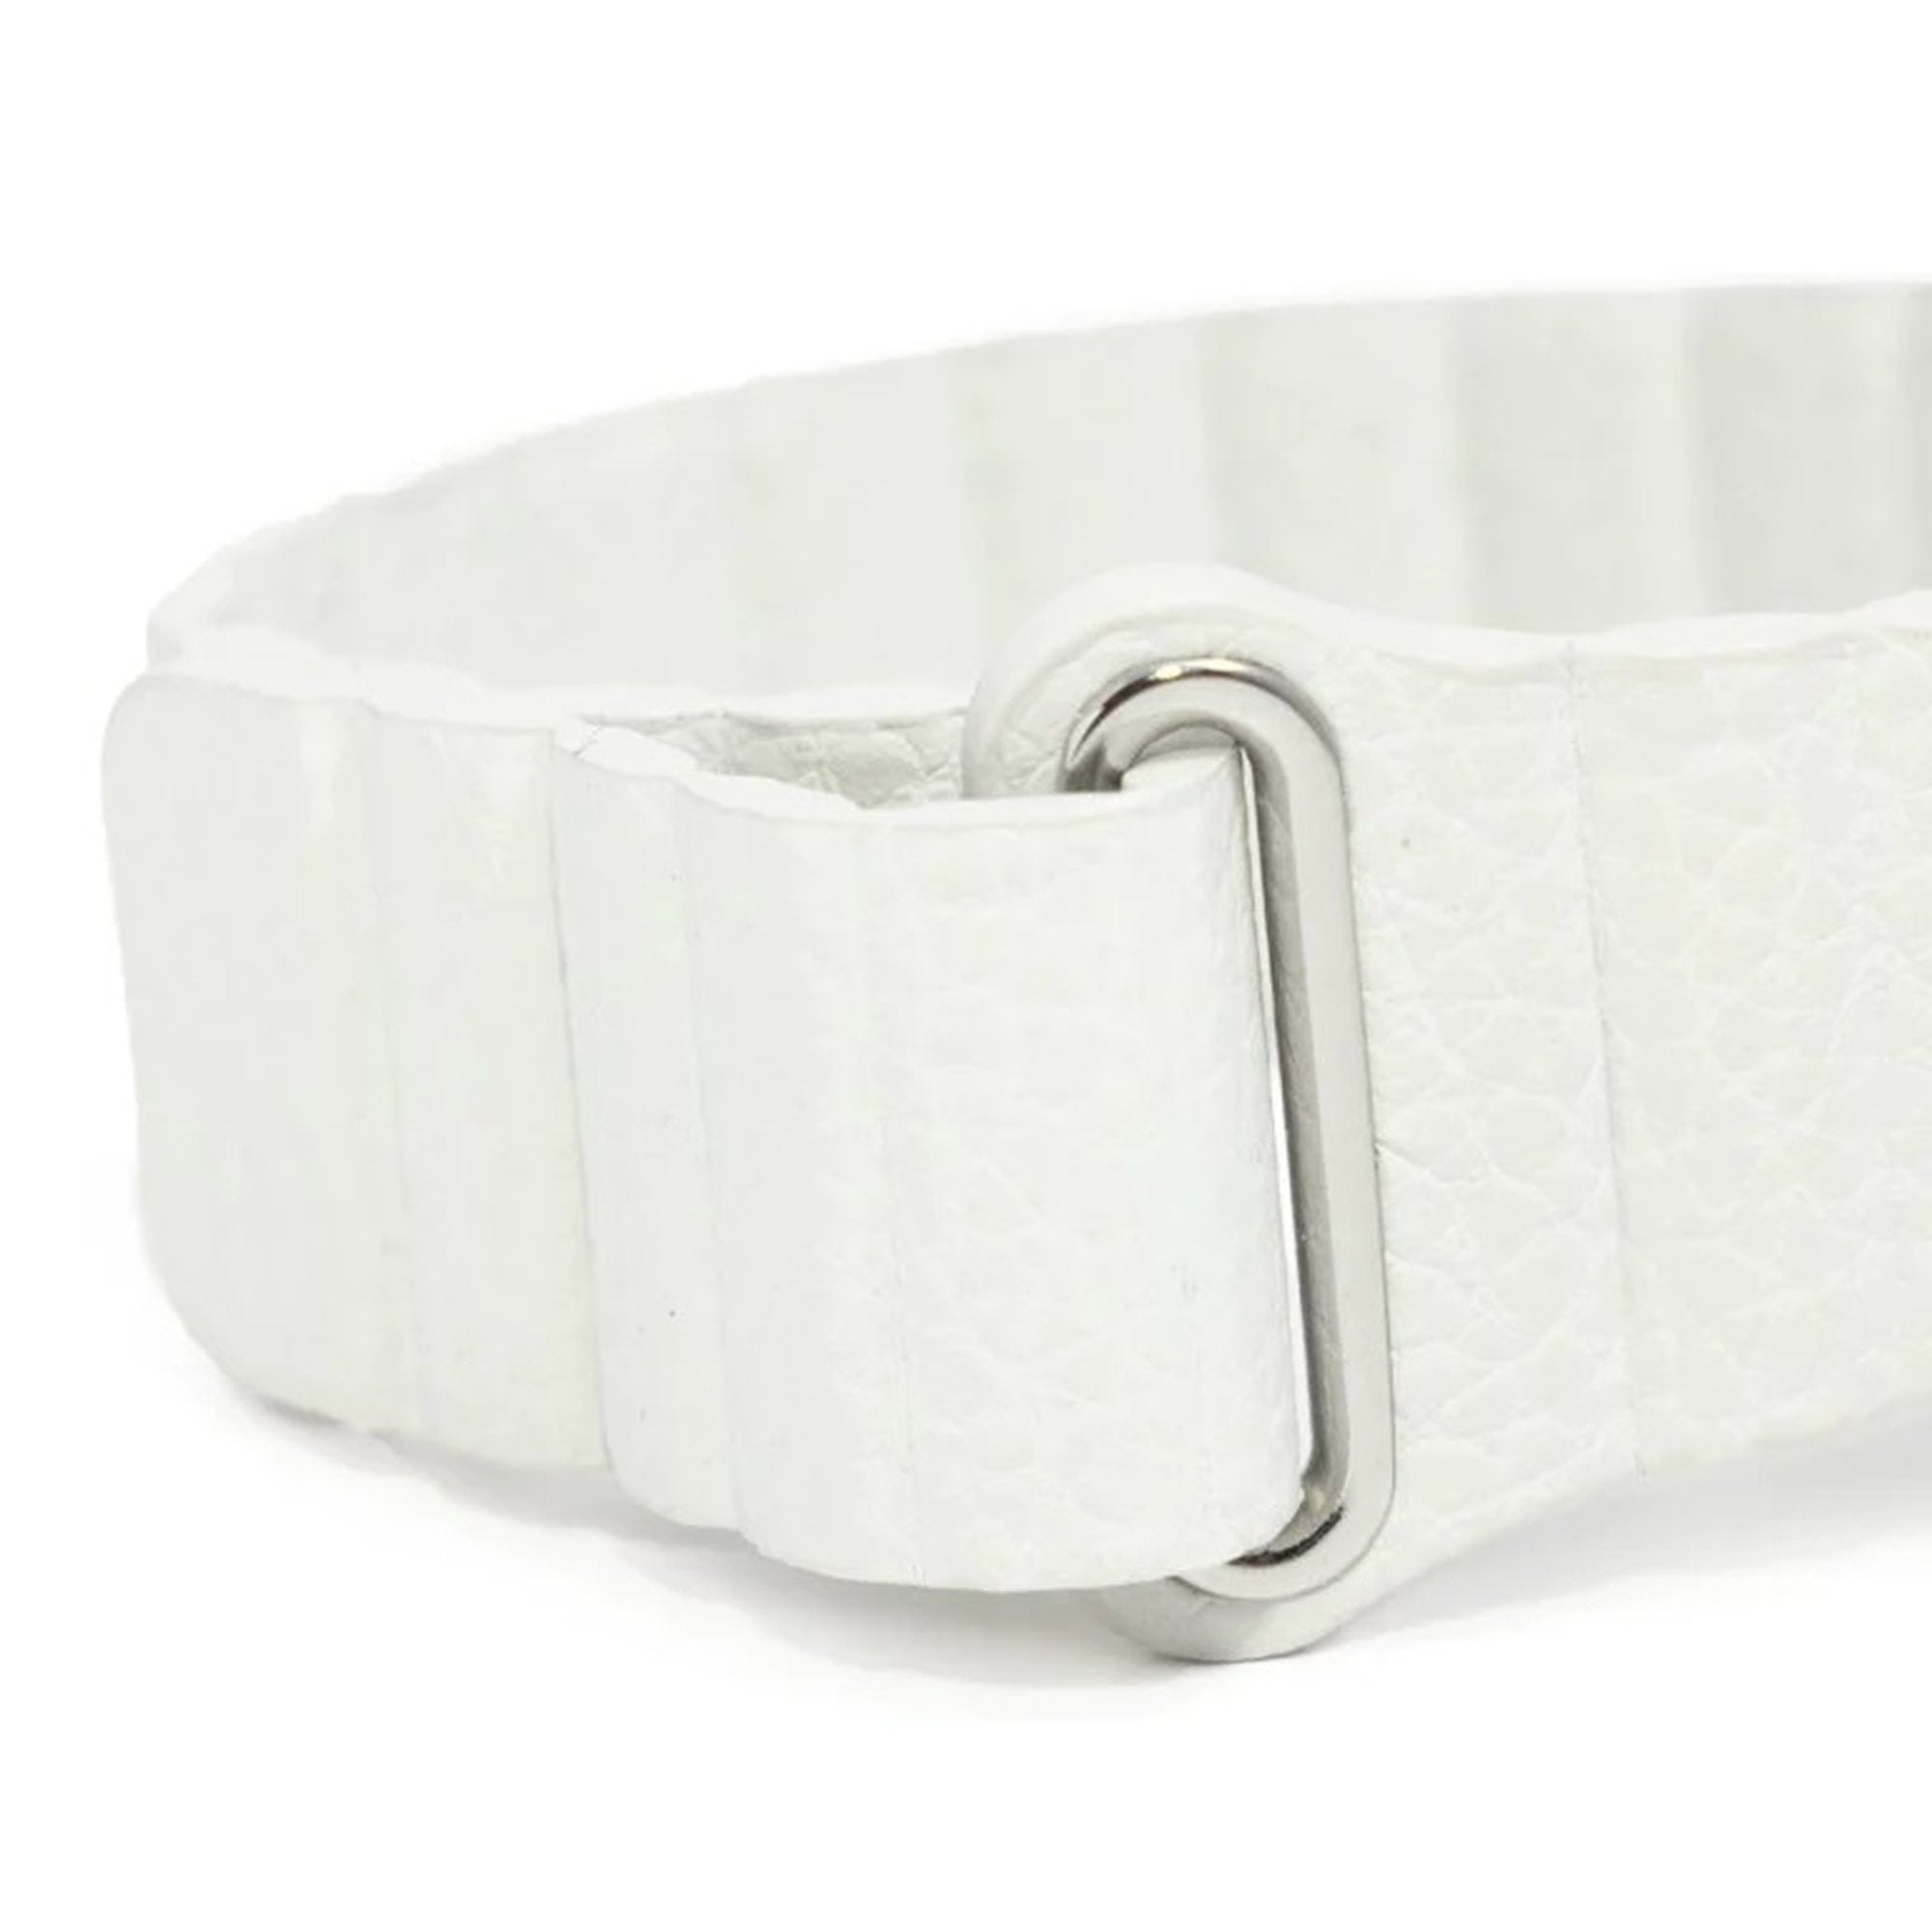 Comfort Band Embr Wave 2 White, Faux Vegan Leather